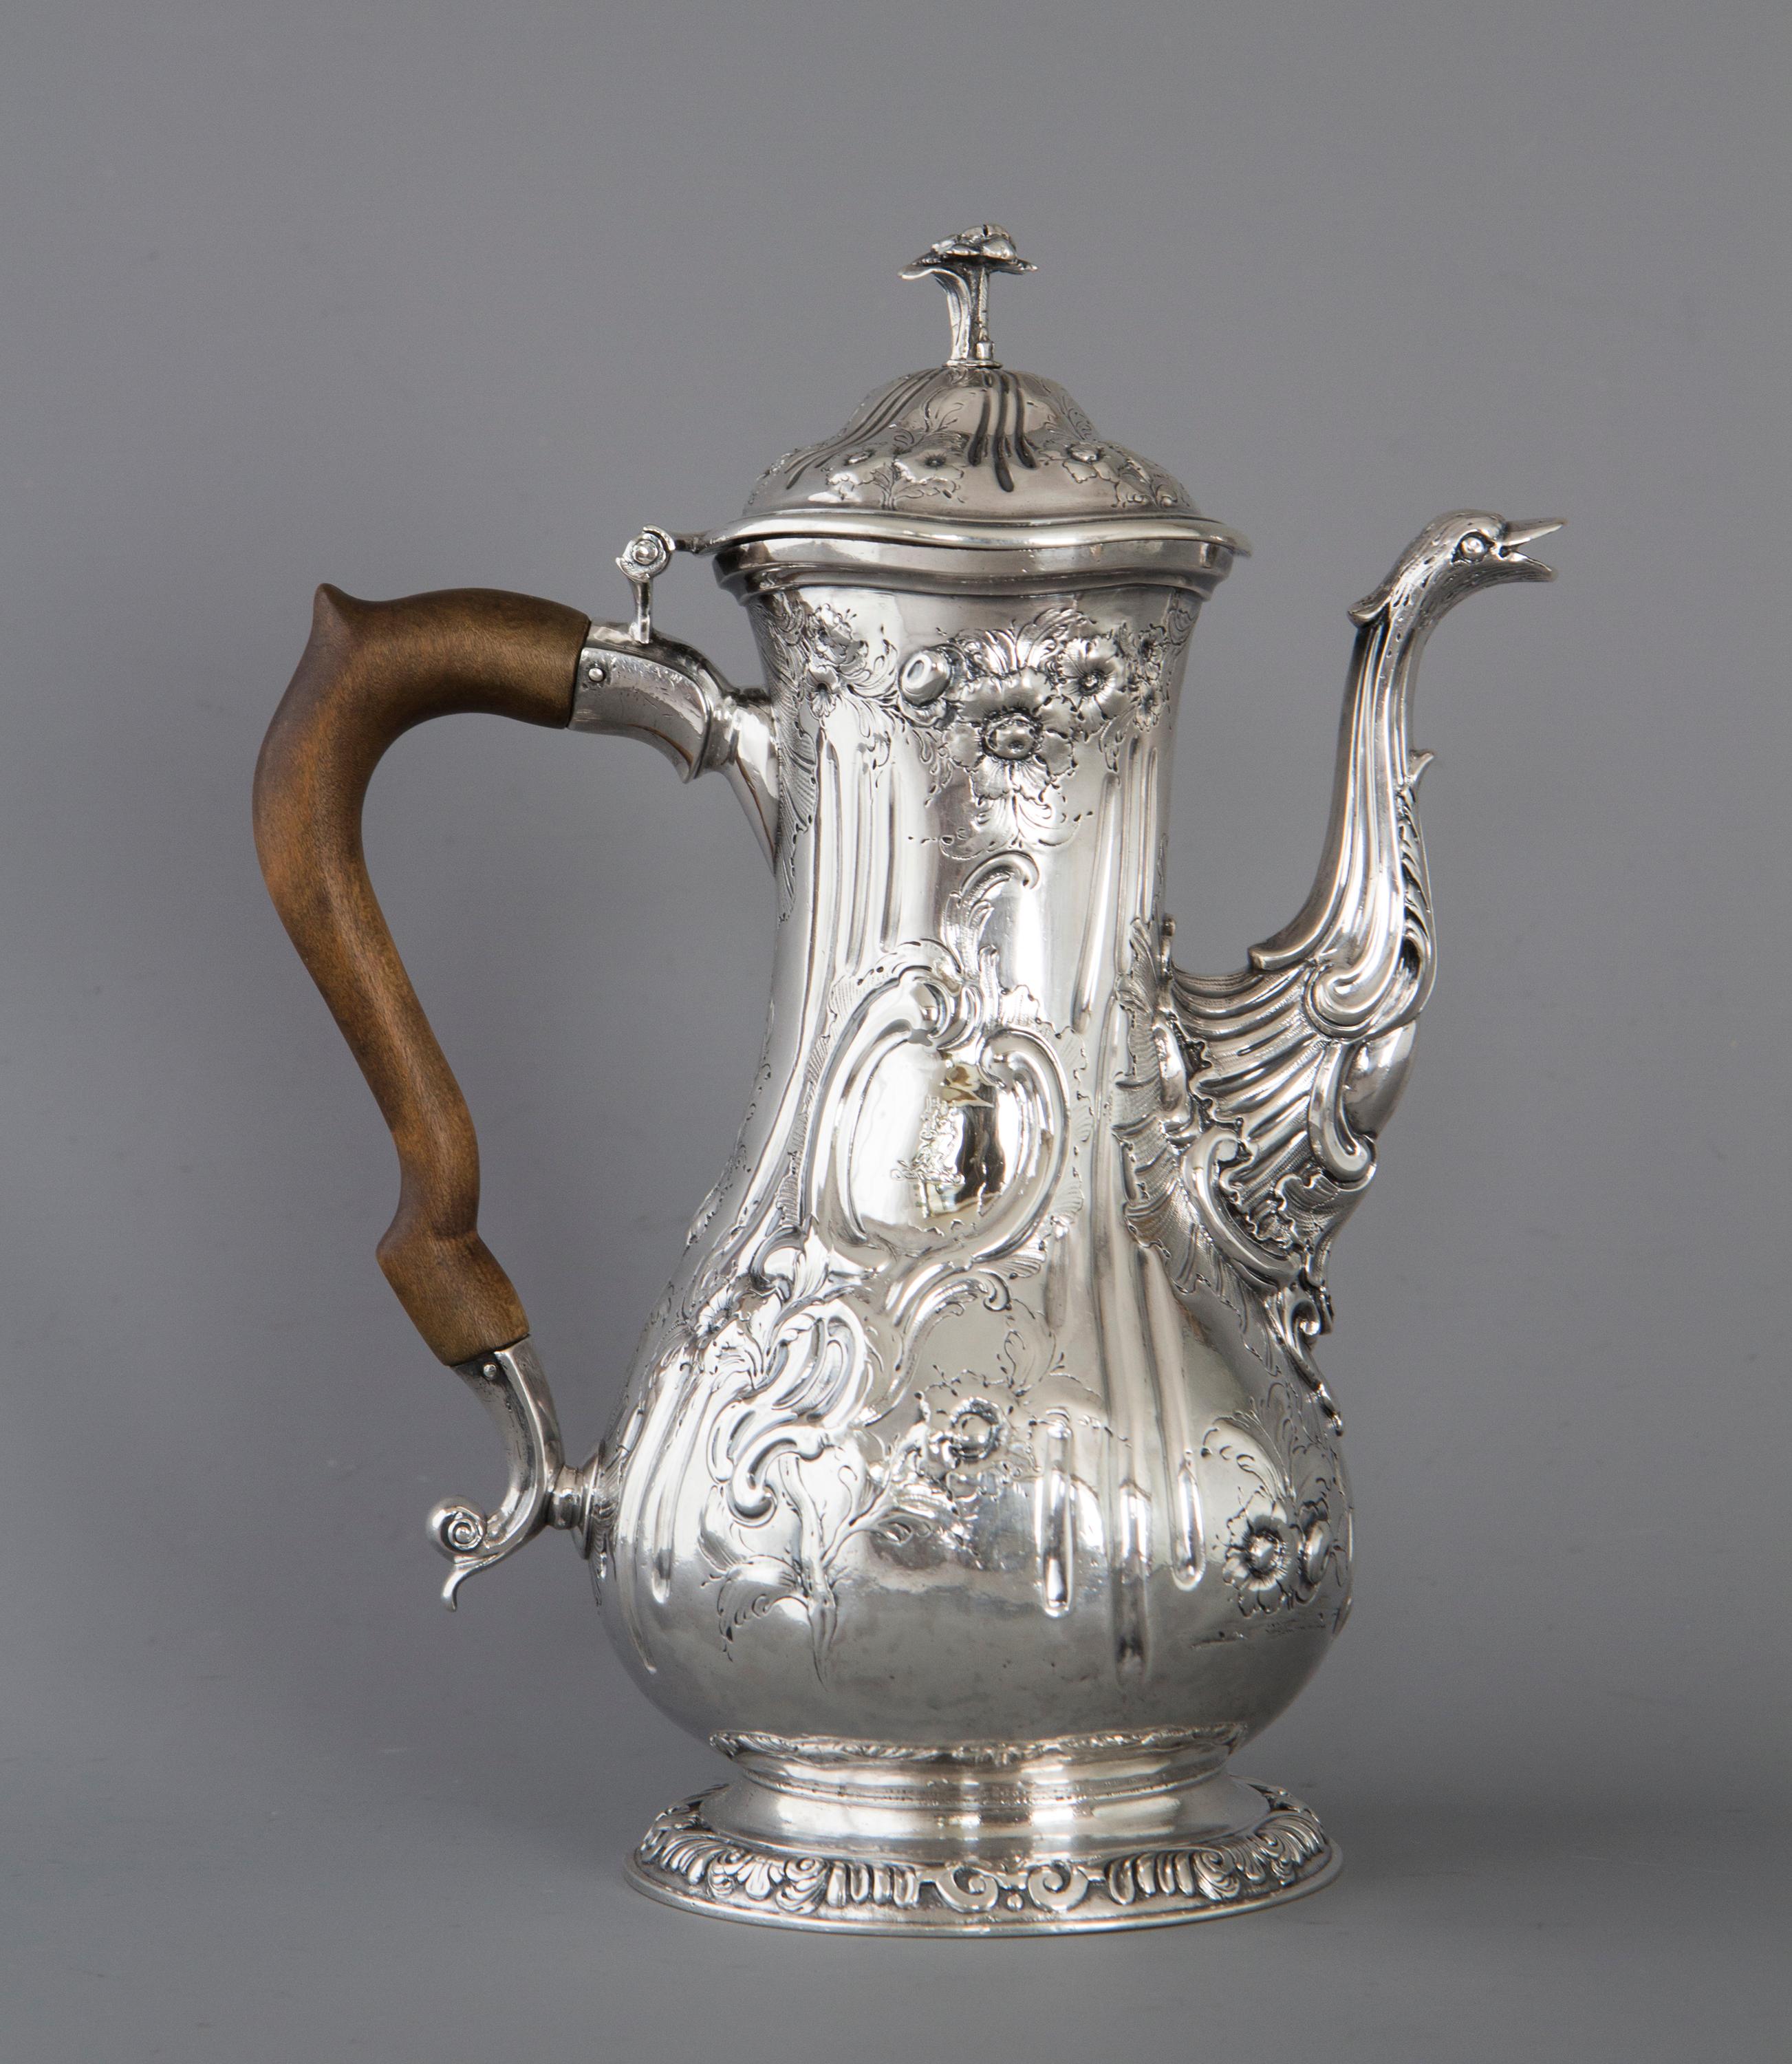 A very good quality Georgian silver coffee pot of baluster form. The ornate cast swan neck spout with a ducks head as the pouring part. The body heavily chased and engraved with floral designs and a cornucopia of flowers arising from an urn. One